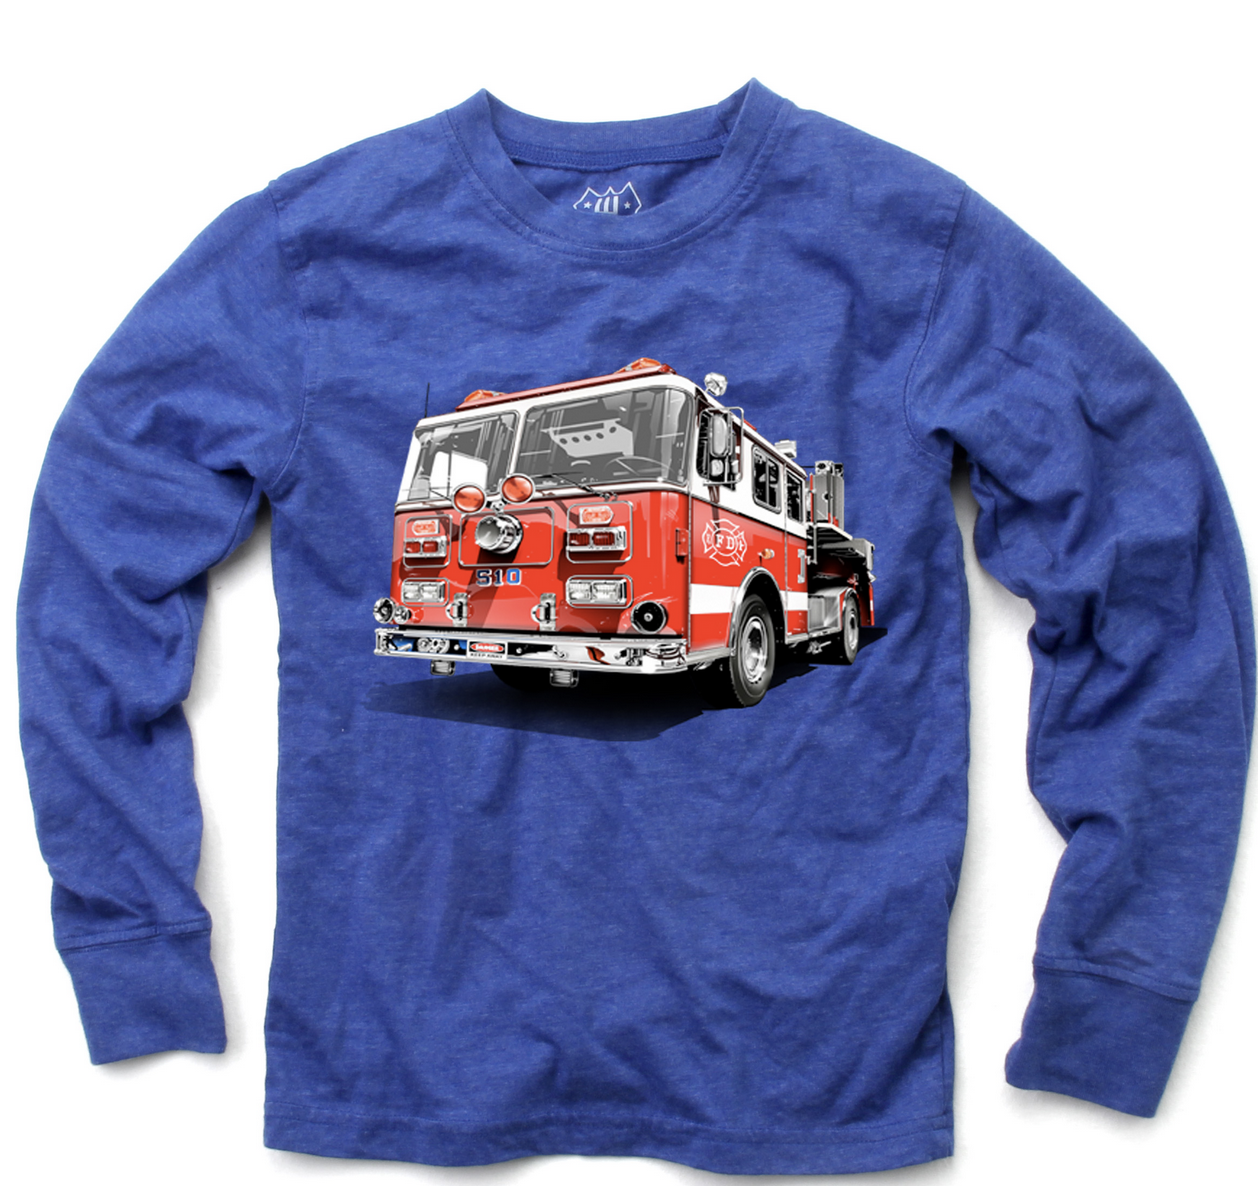 Wes And Willy Fire Truck L/S Tee-Blue